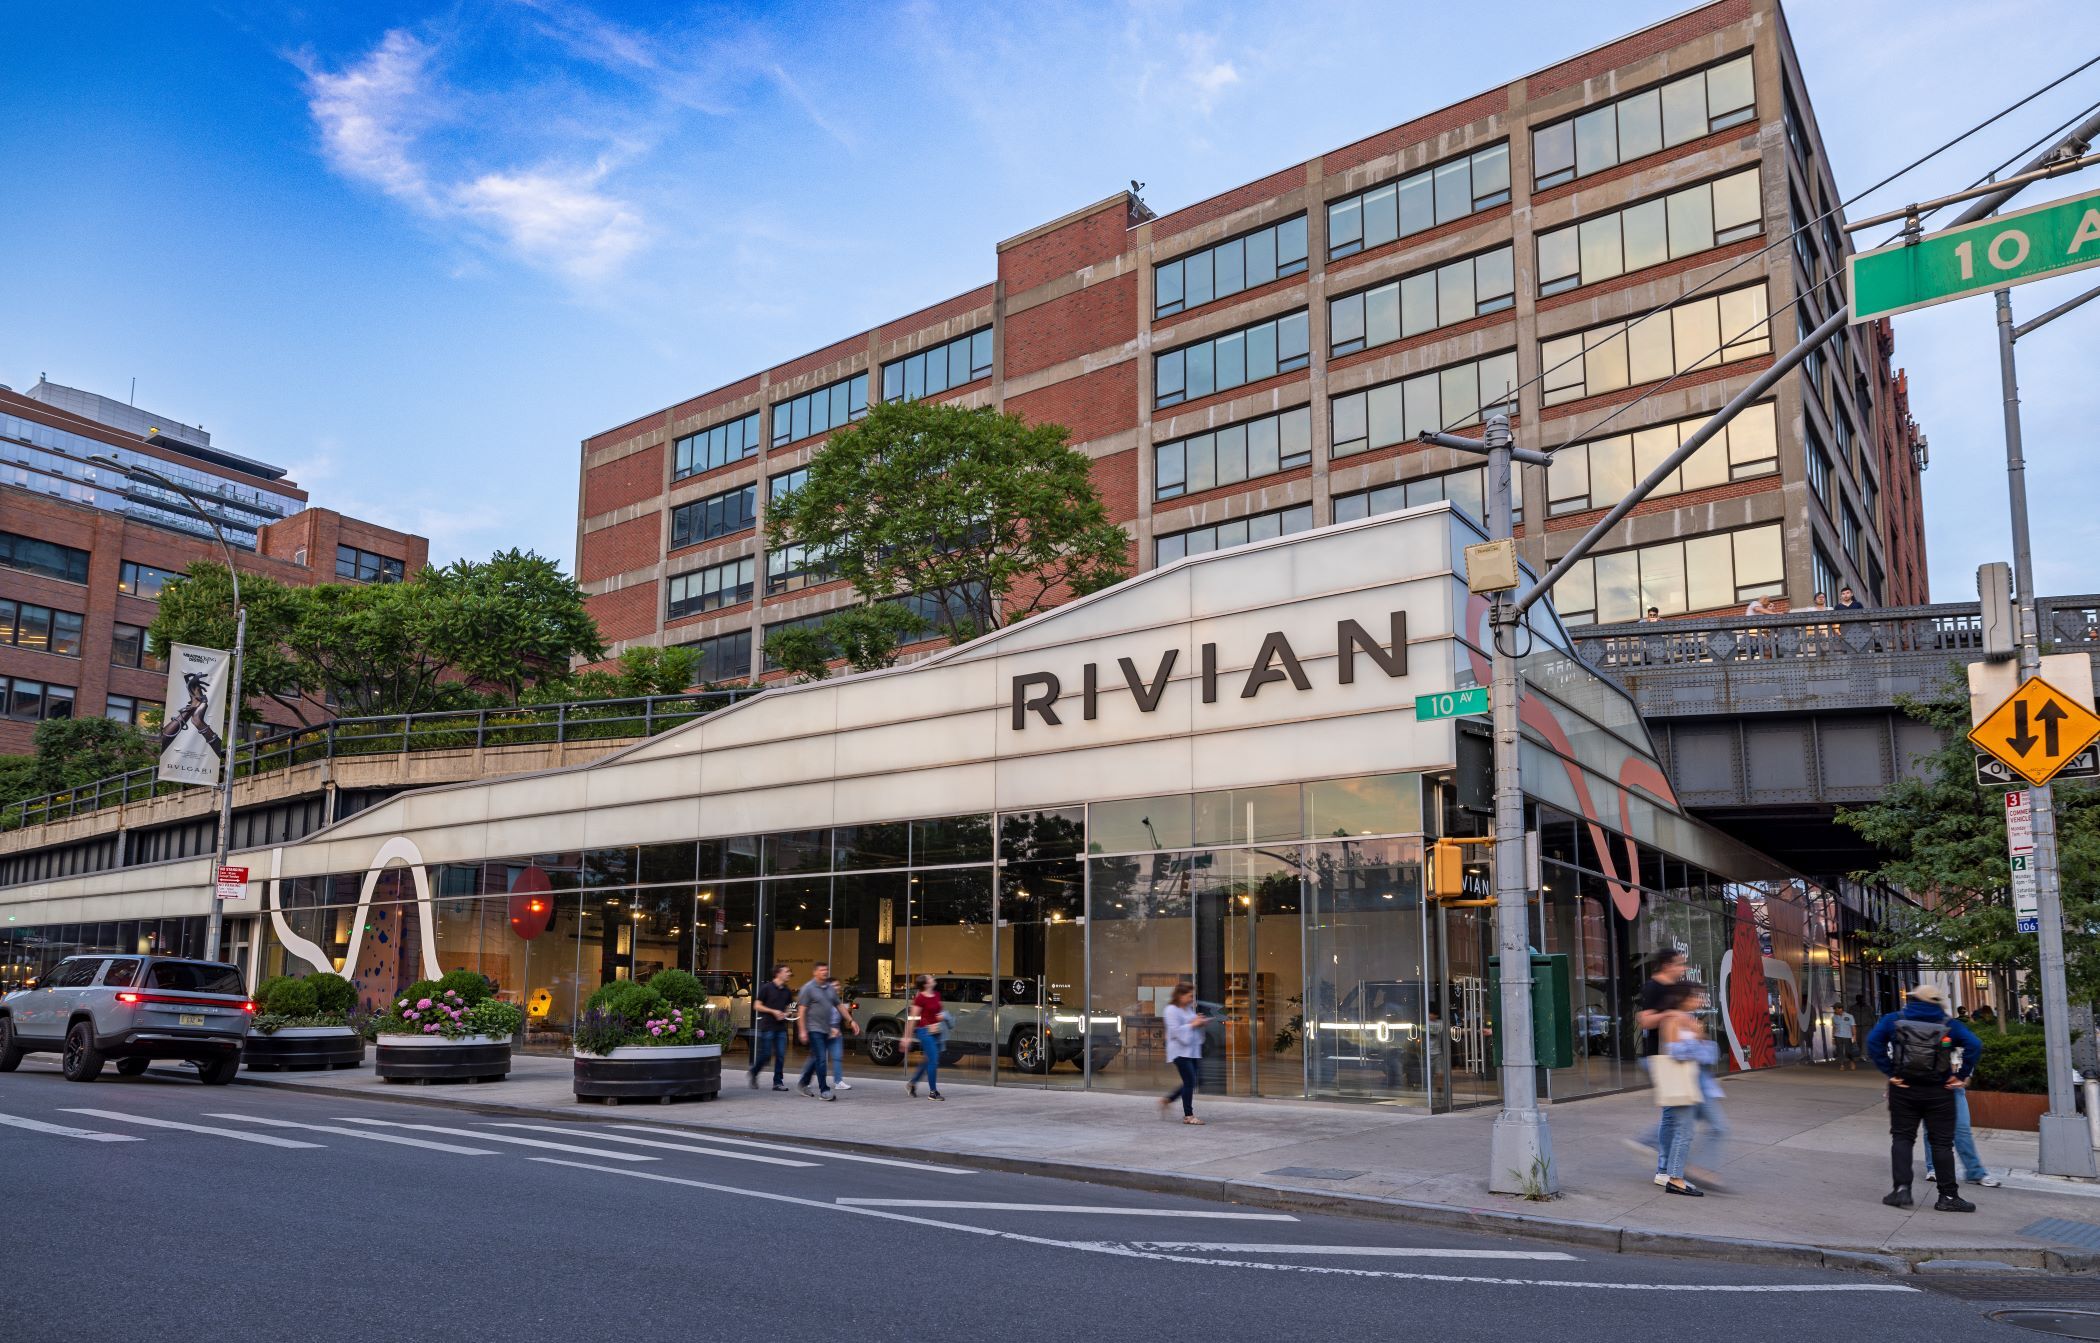 Electric truck maker Rivian opened its first East Coast retail outpost in New York as it plans to launch more than 10 locations across the country this year. (Rivian)